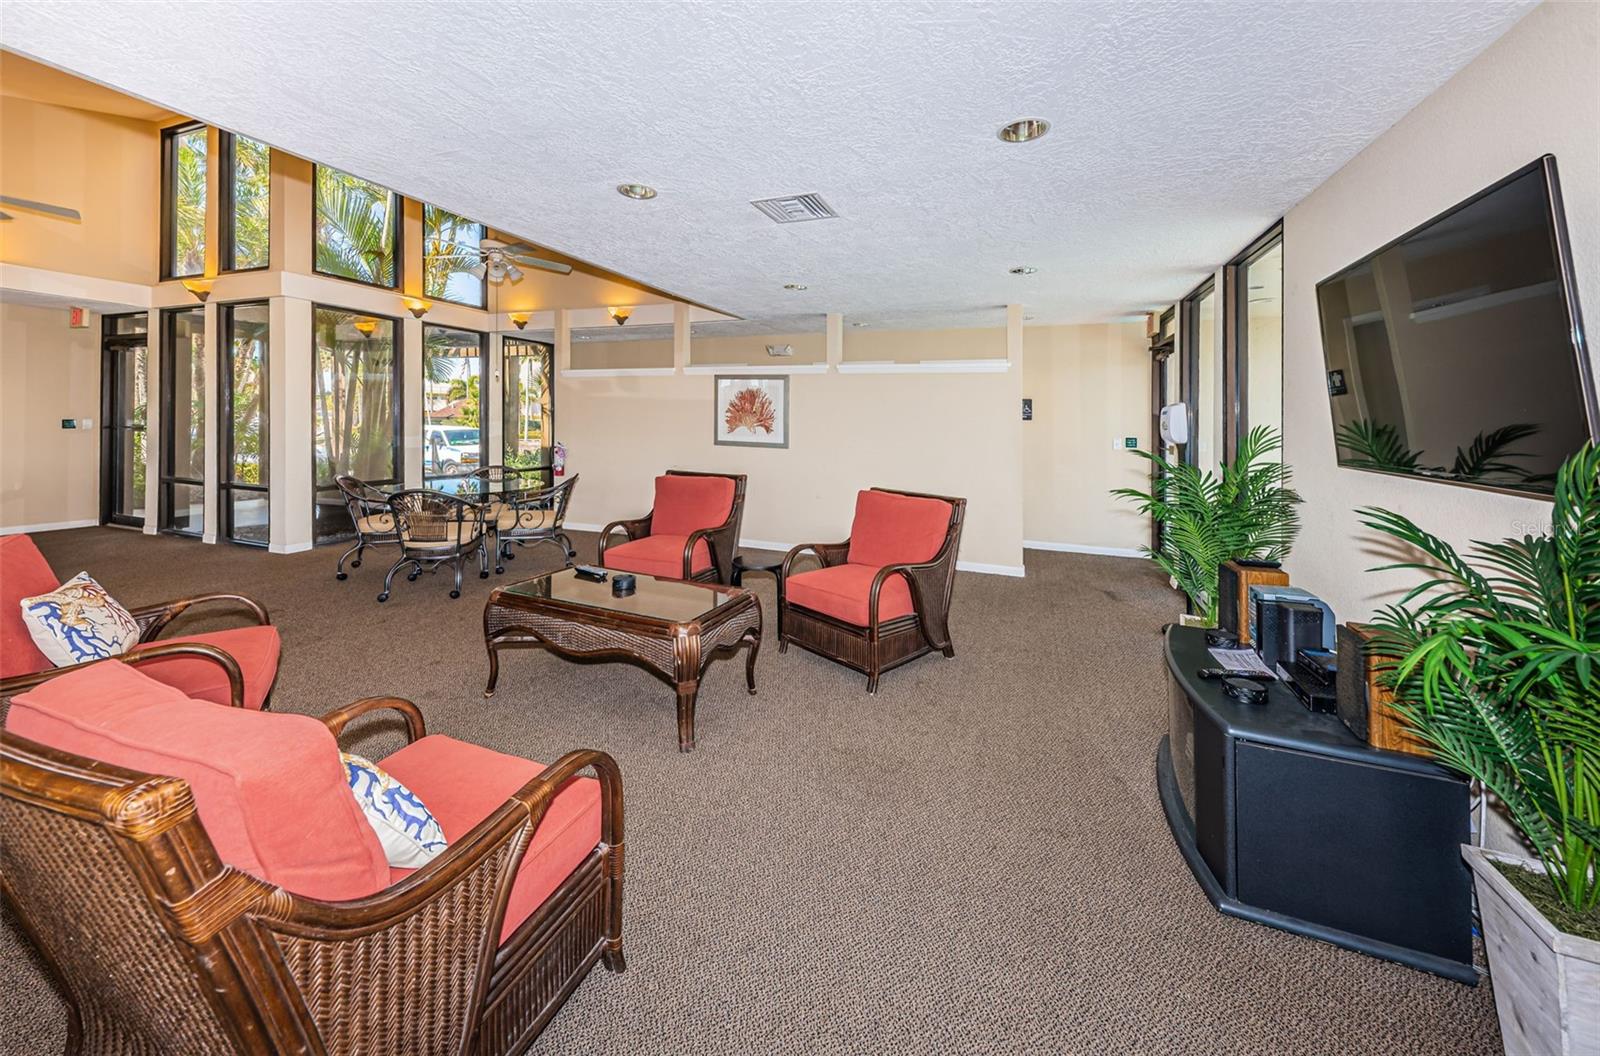 Social Center includes Kitchen, Fitness Room, Billiards & Workspace.  Access to Heated Pool.